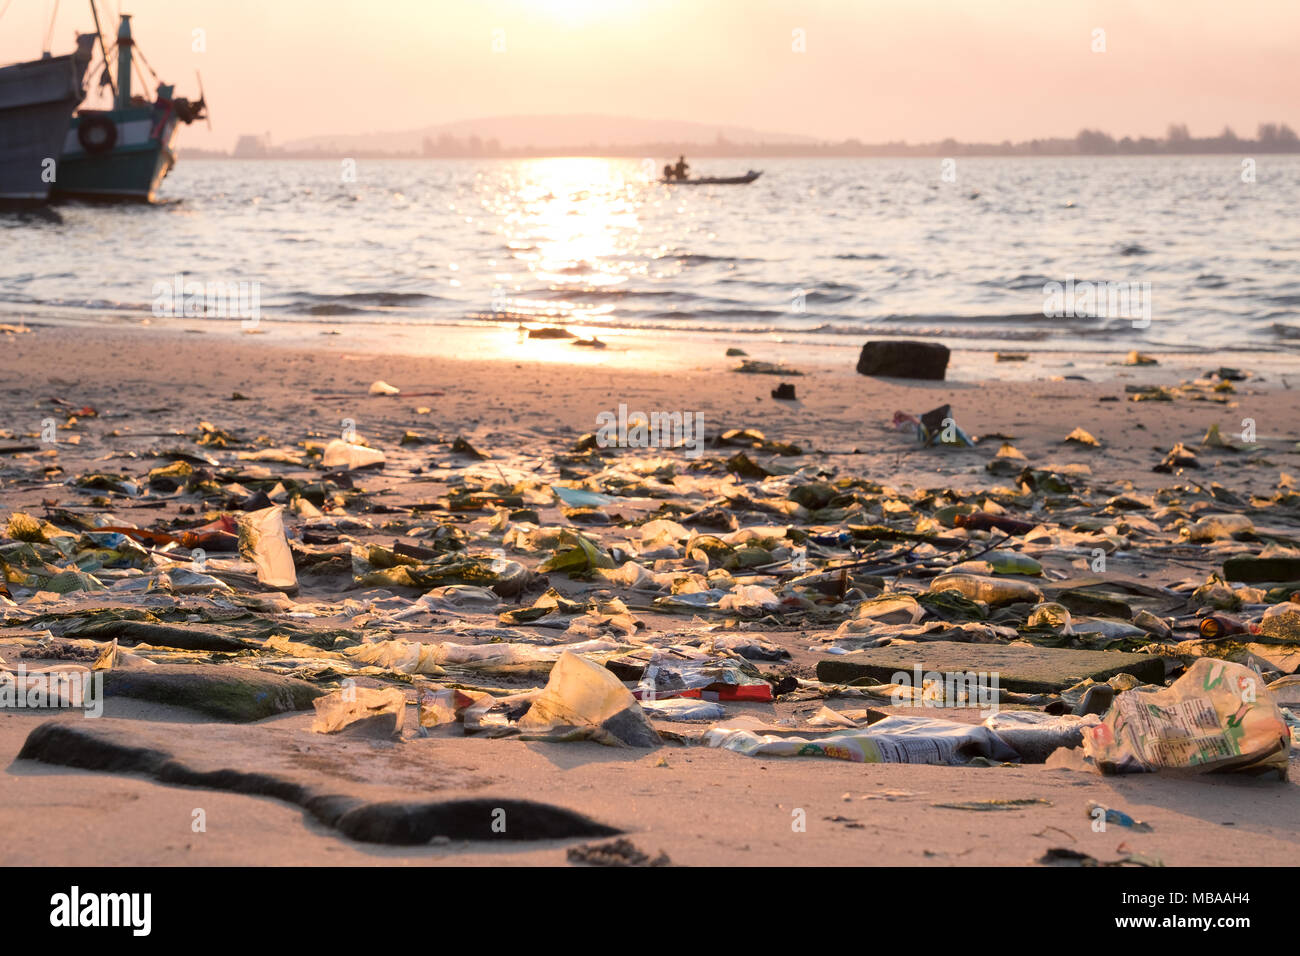 Spontaneous garbage dump on a beach in Indochina Stock Photo